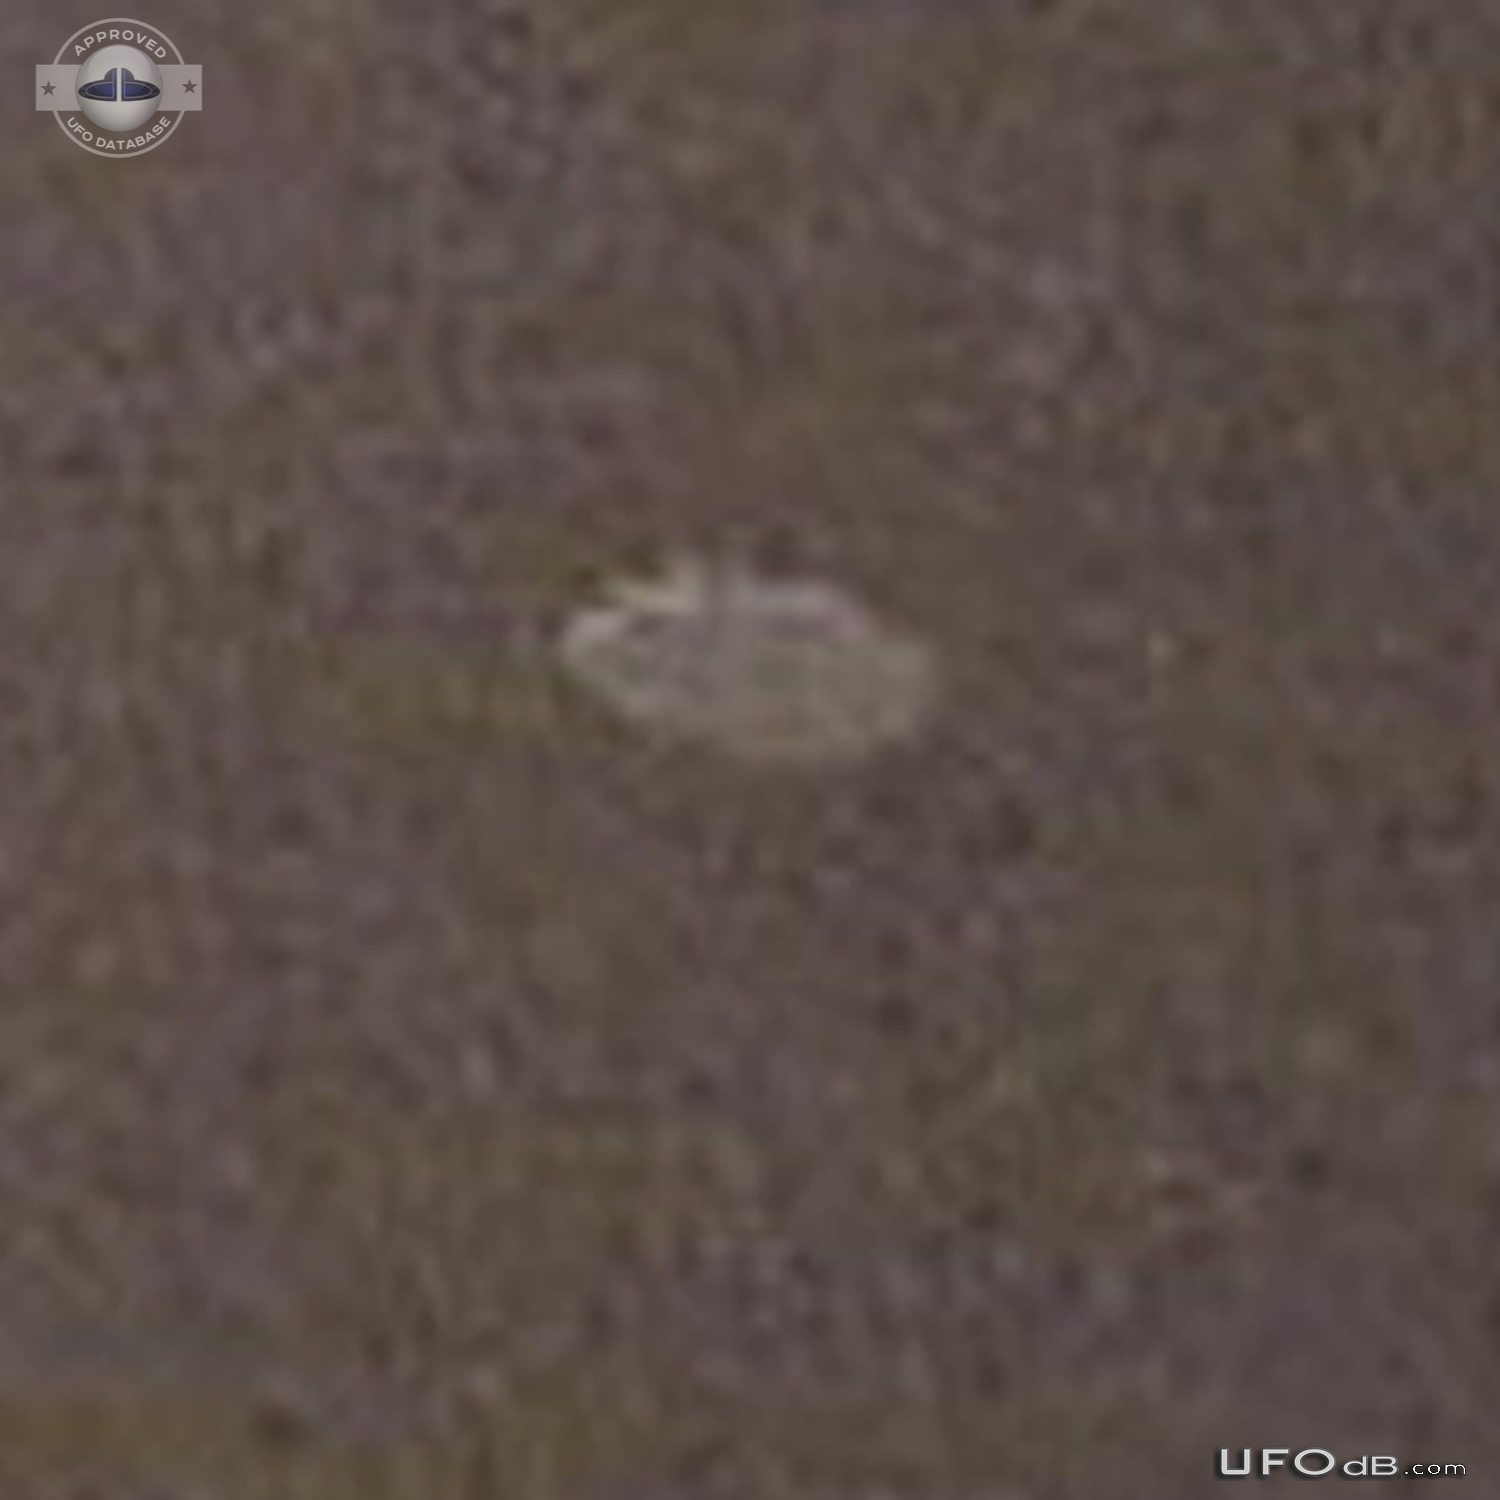 Mysterious UFO picture showing UFO near plane taken in 1952 in North K UFO Picture #837-4